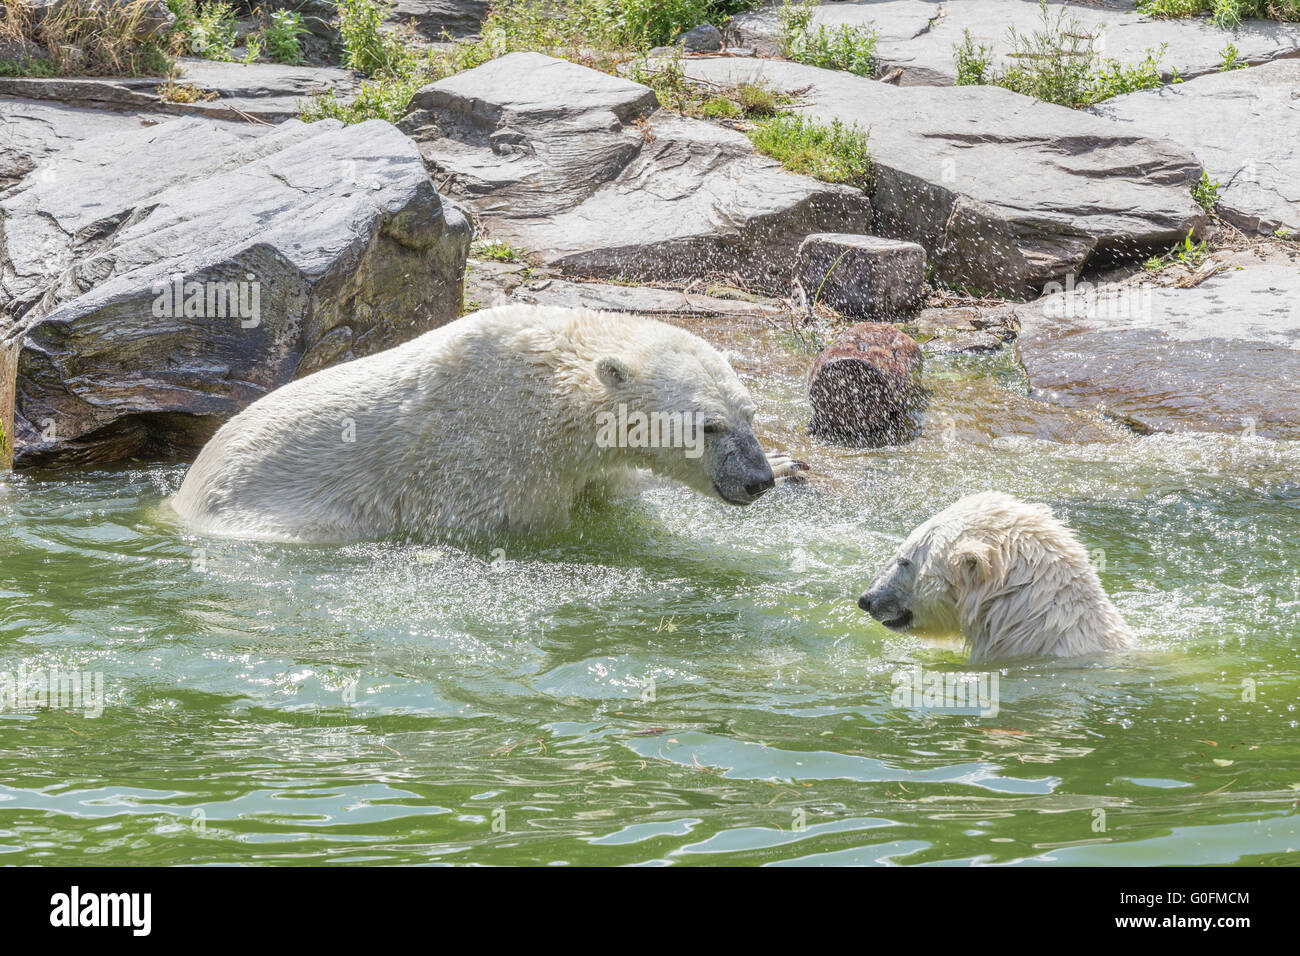 Two bears in water Stock Photo